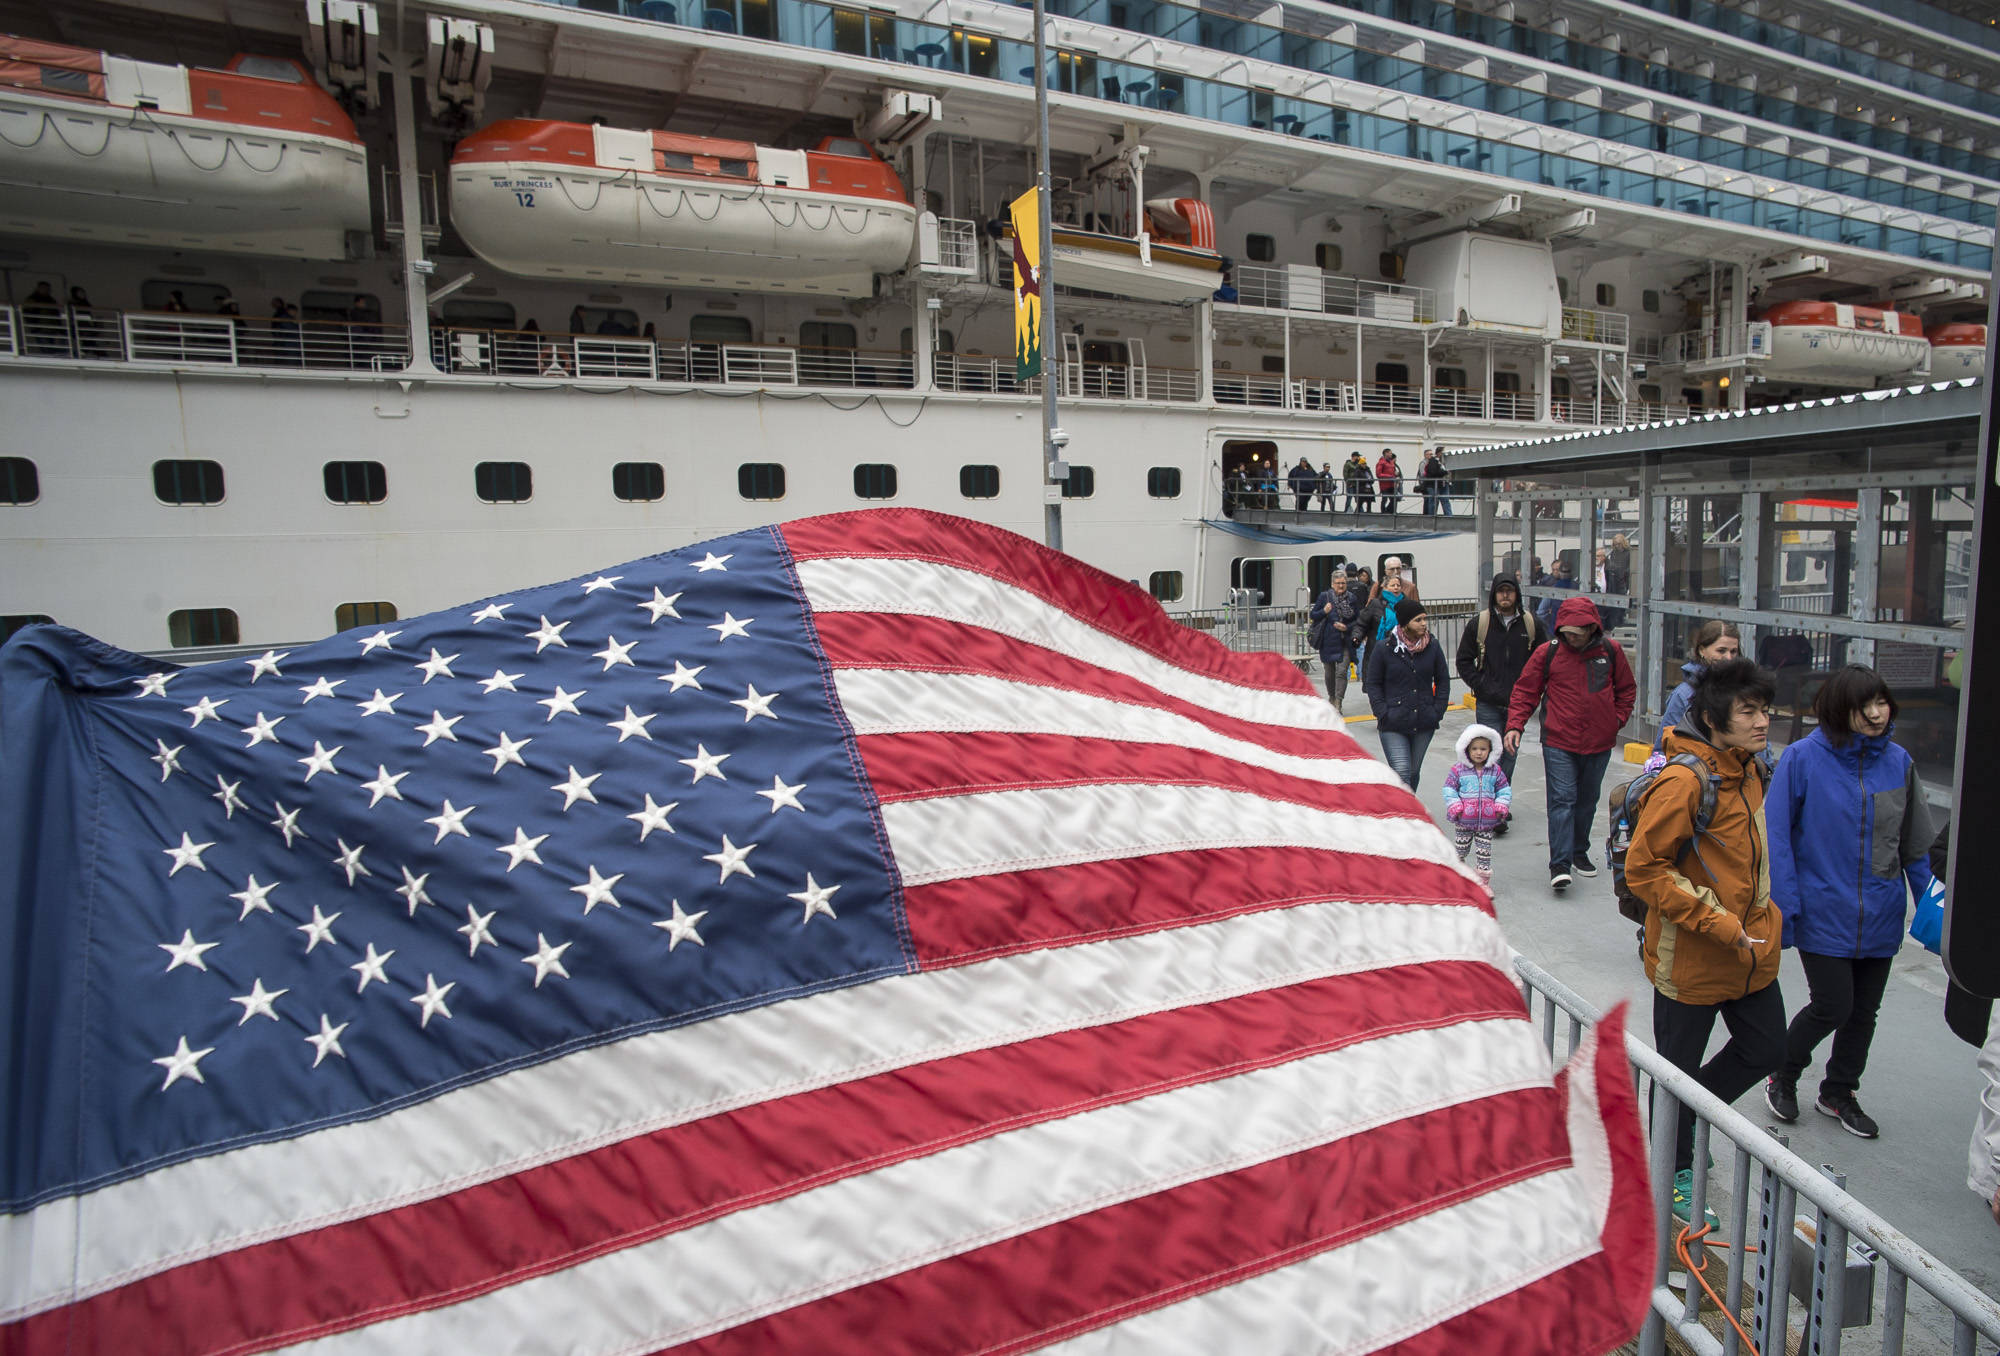 The Ruby Princess is escorted by the U.S. Coast Guard into the Juneau downtown harbor on April 30, 2018. (Michael Penn | Juneau Empire File)